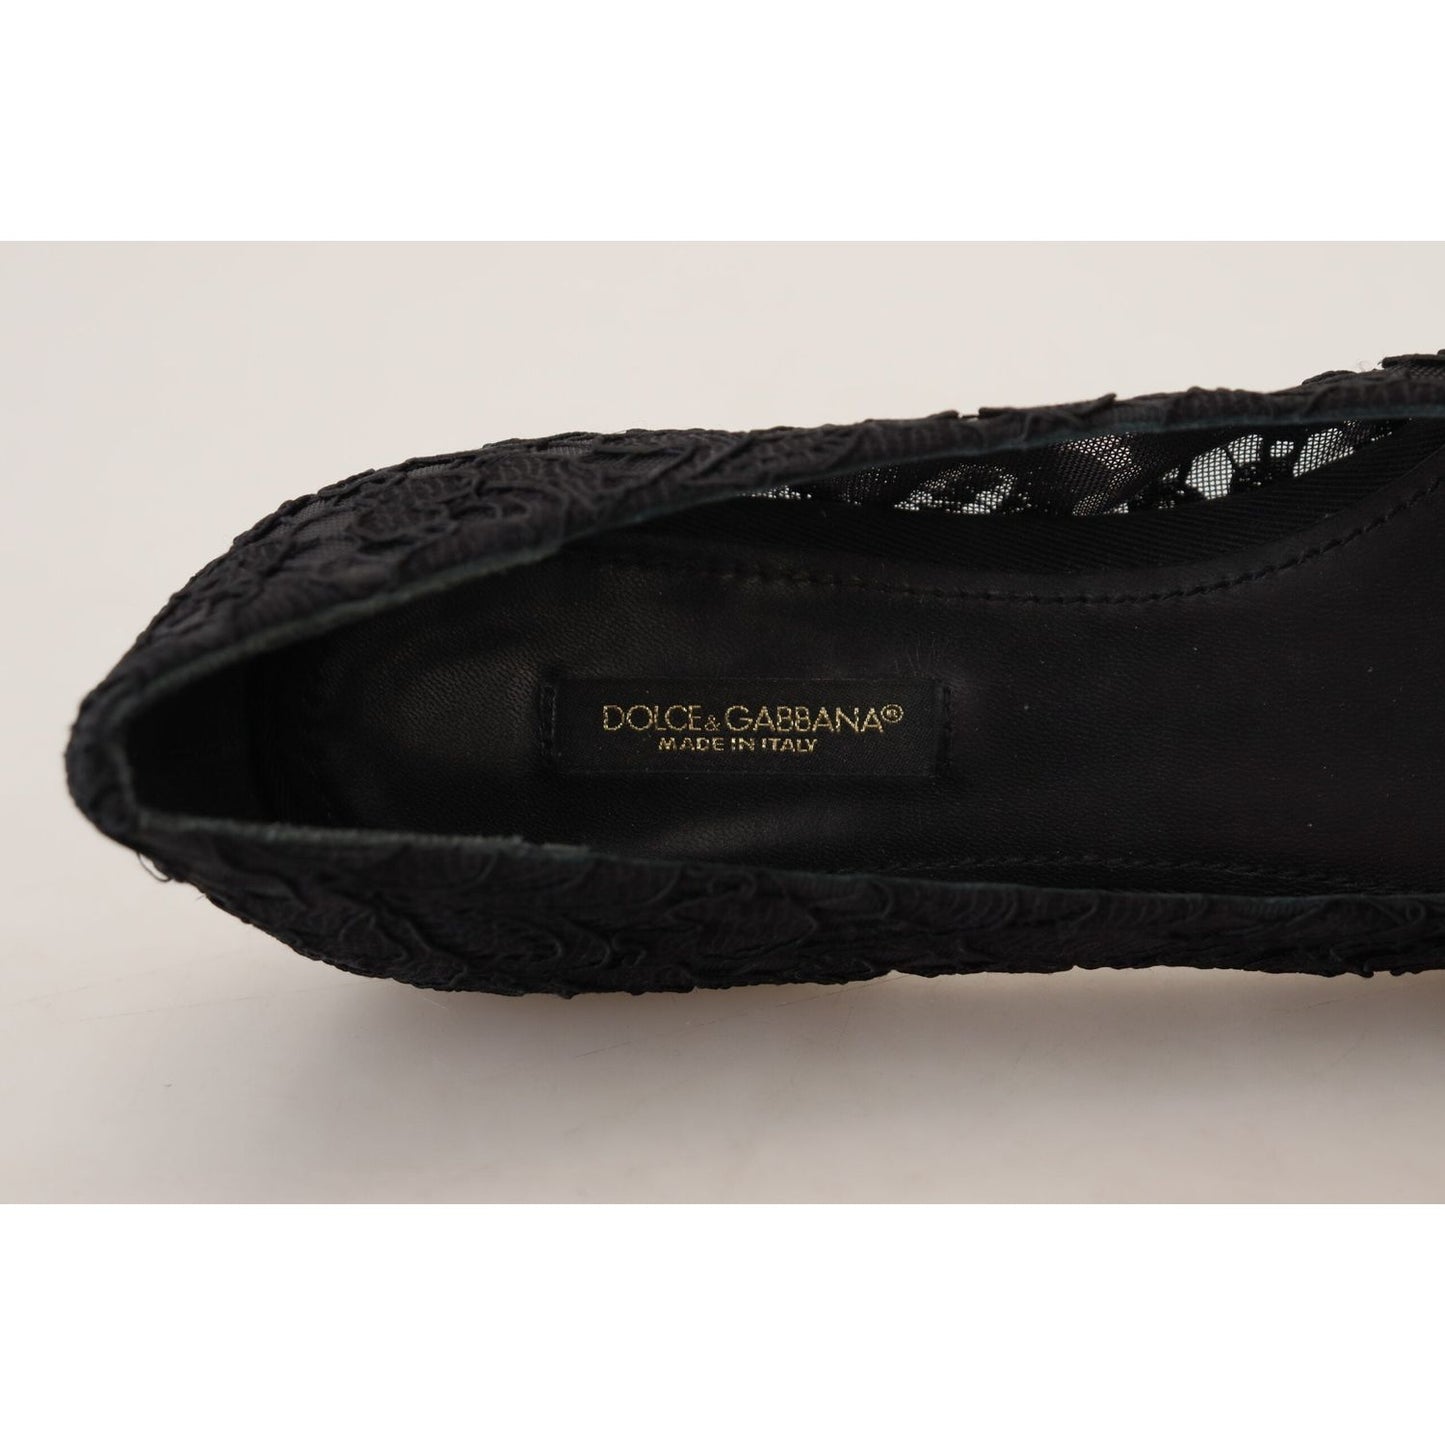 Dolce & Gabbana Elegant Floral Lace Flat Vally Shoes black-taormina-lace-crystals-flats-shoes